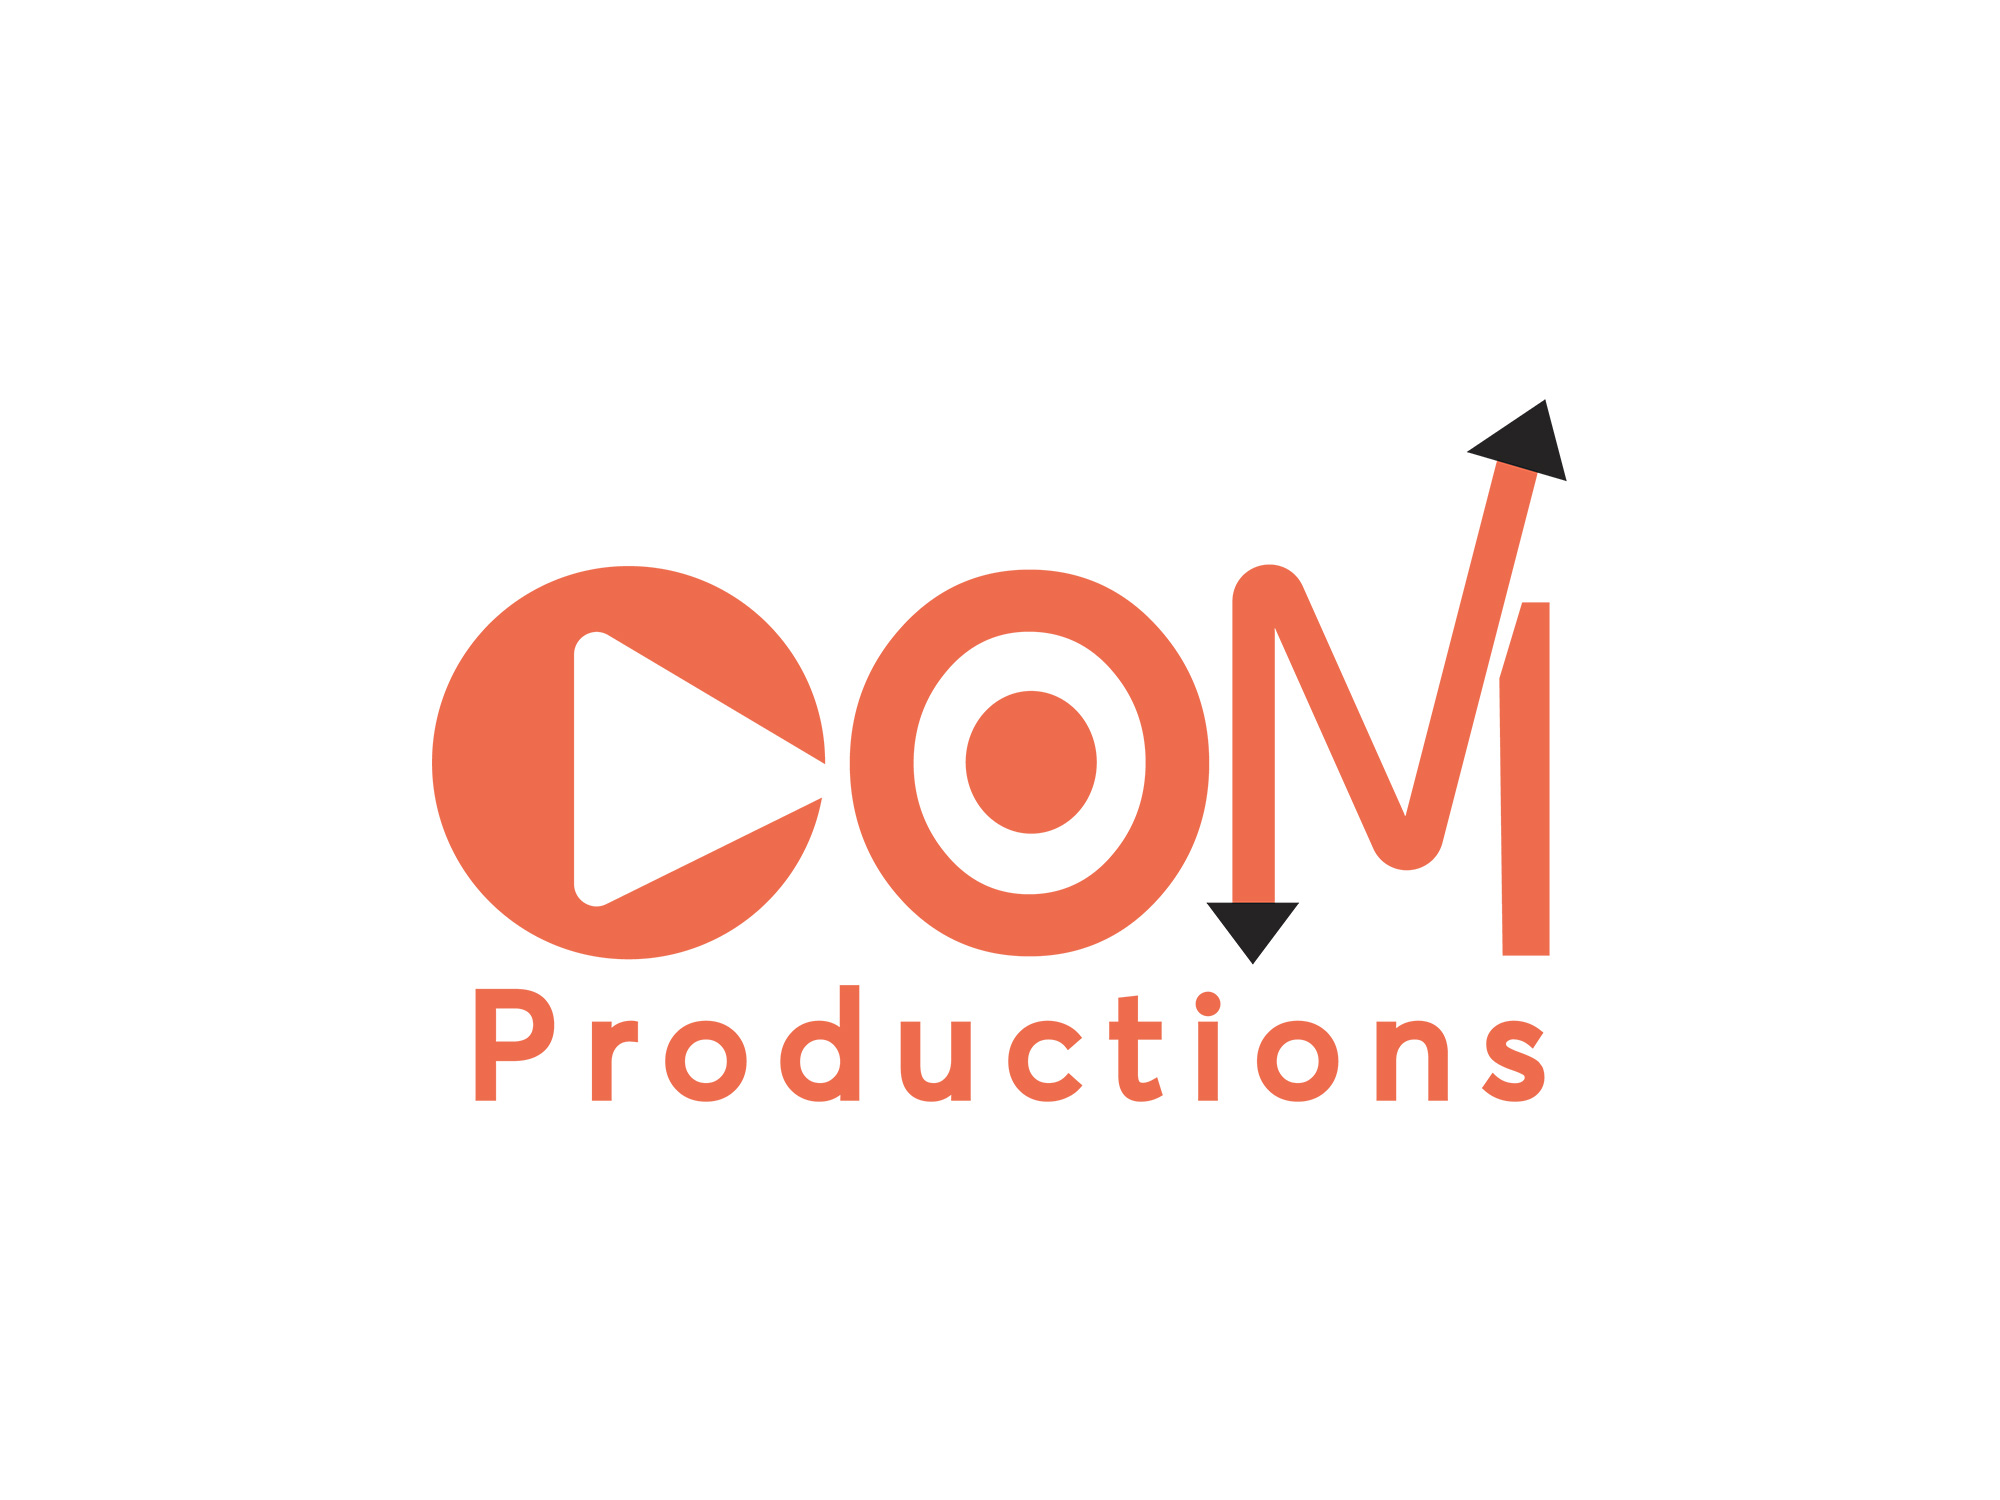 com Production Logo Designing - xpertlab technologies private limited